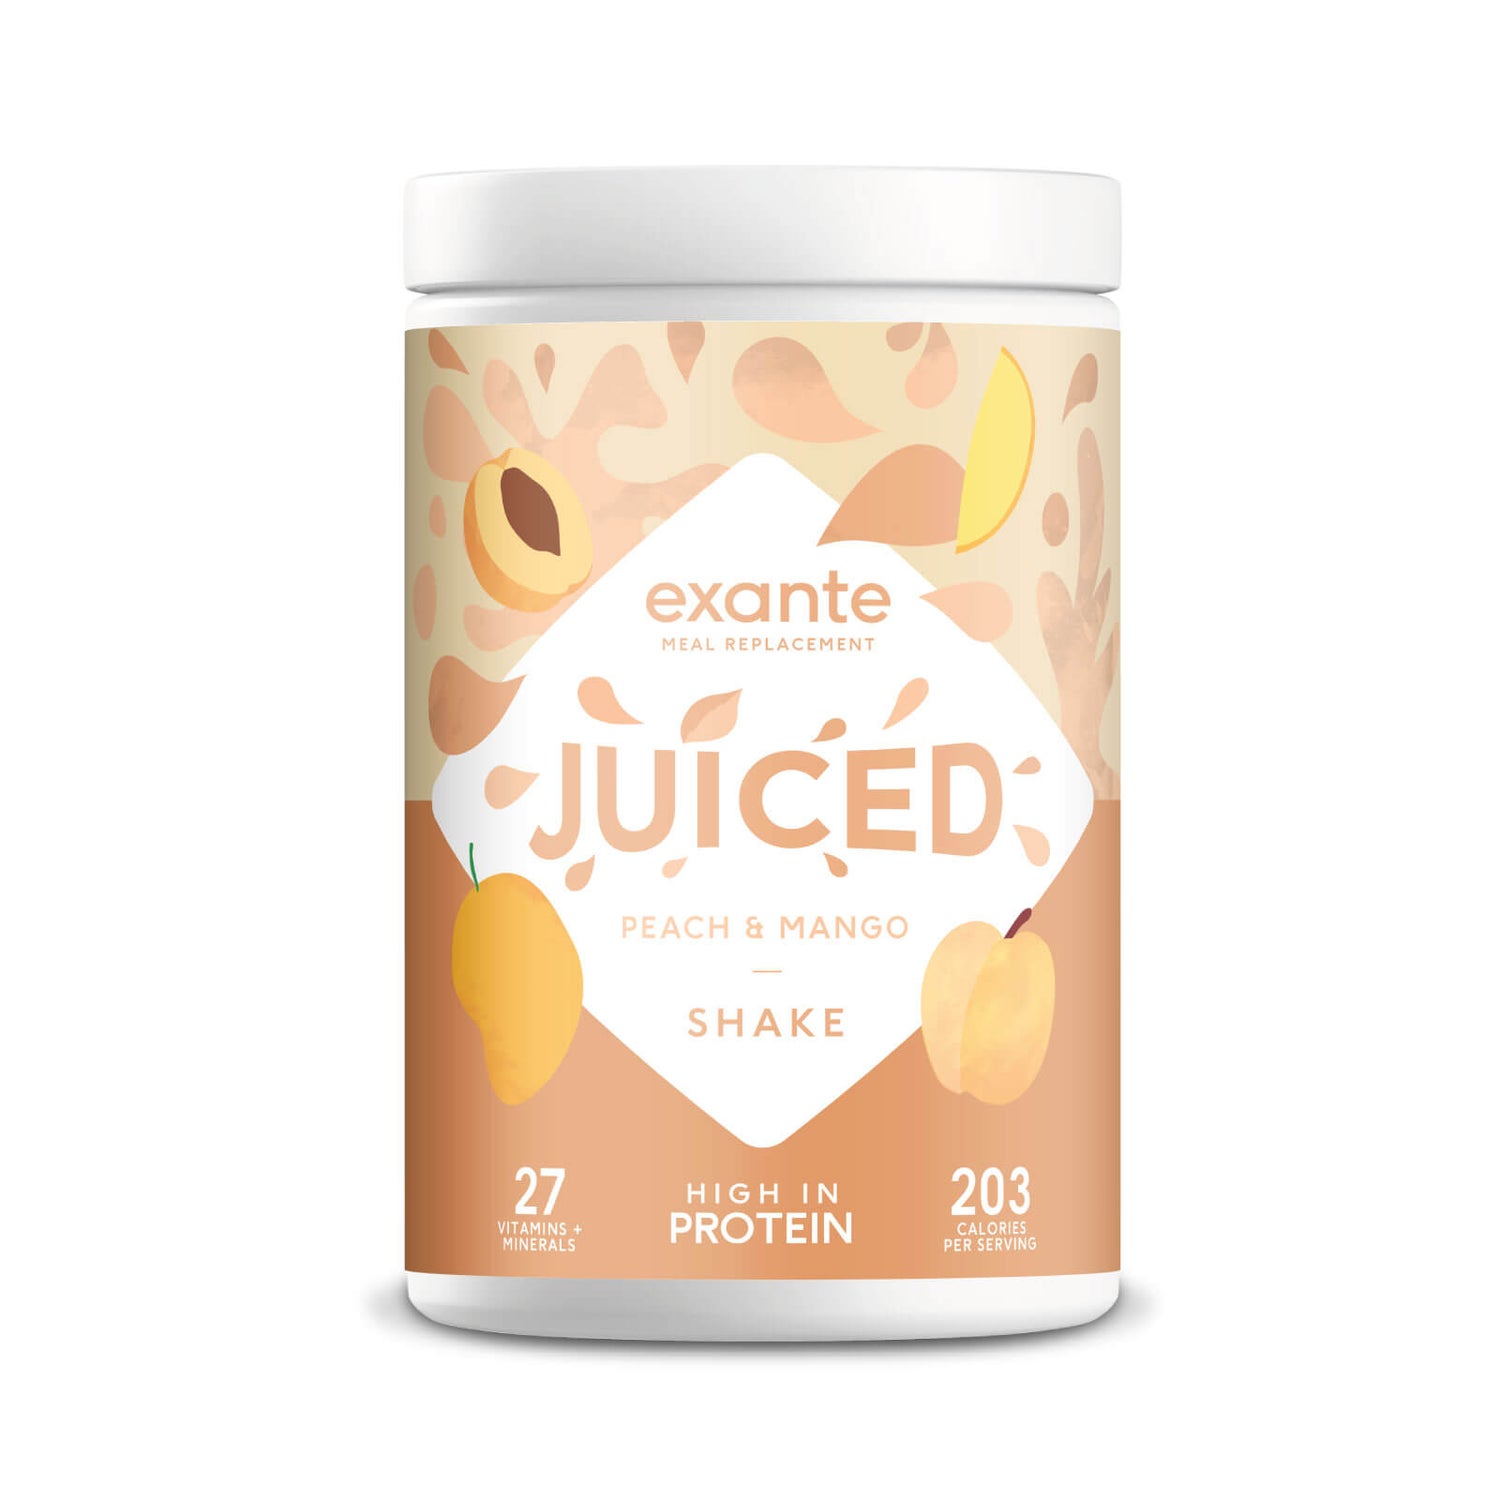 JUICED Meal Replacement Shake